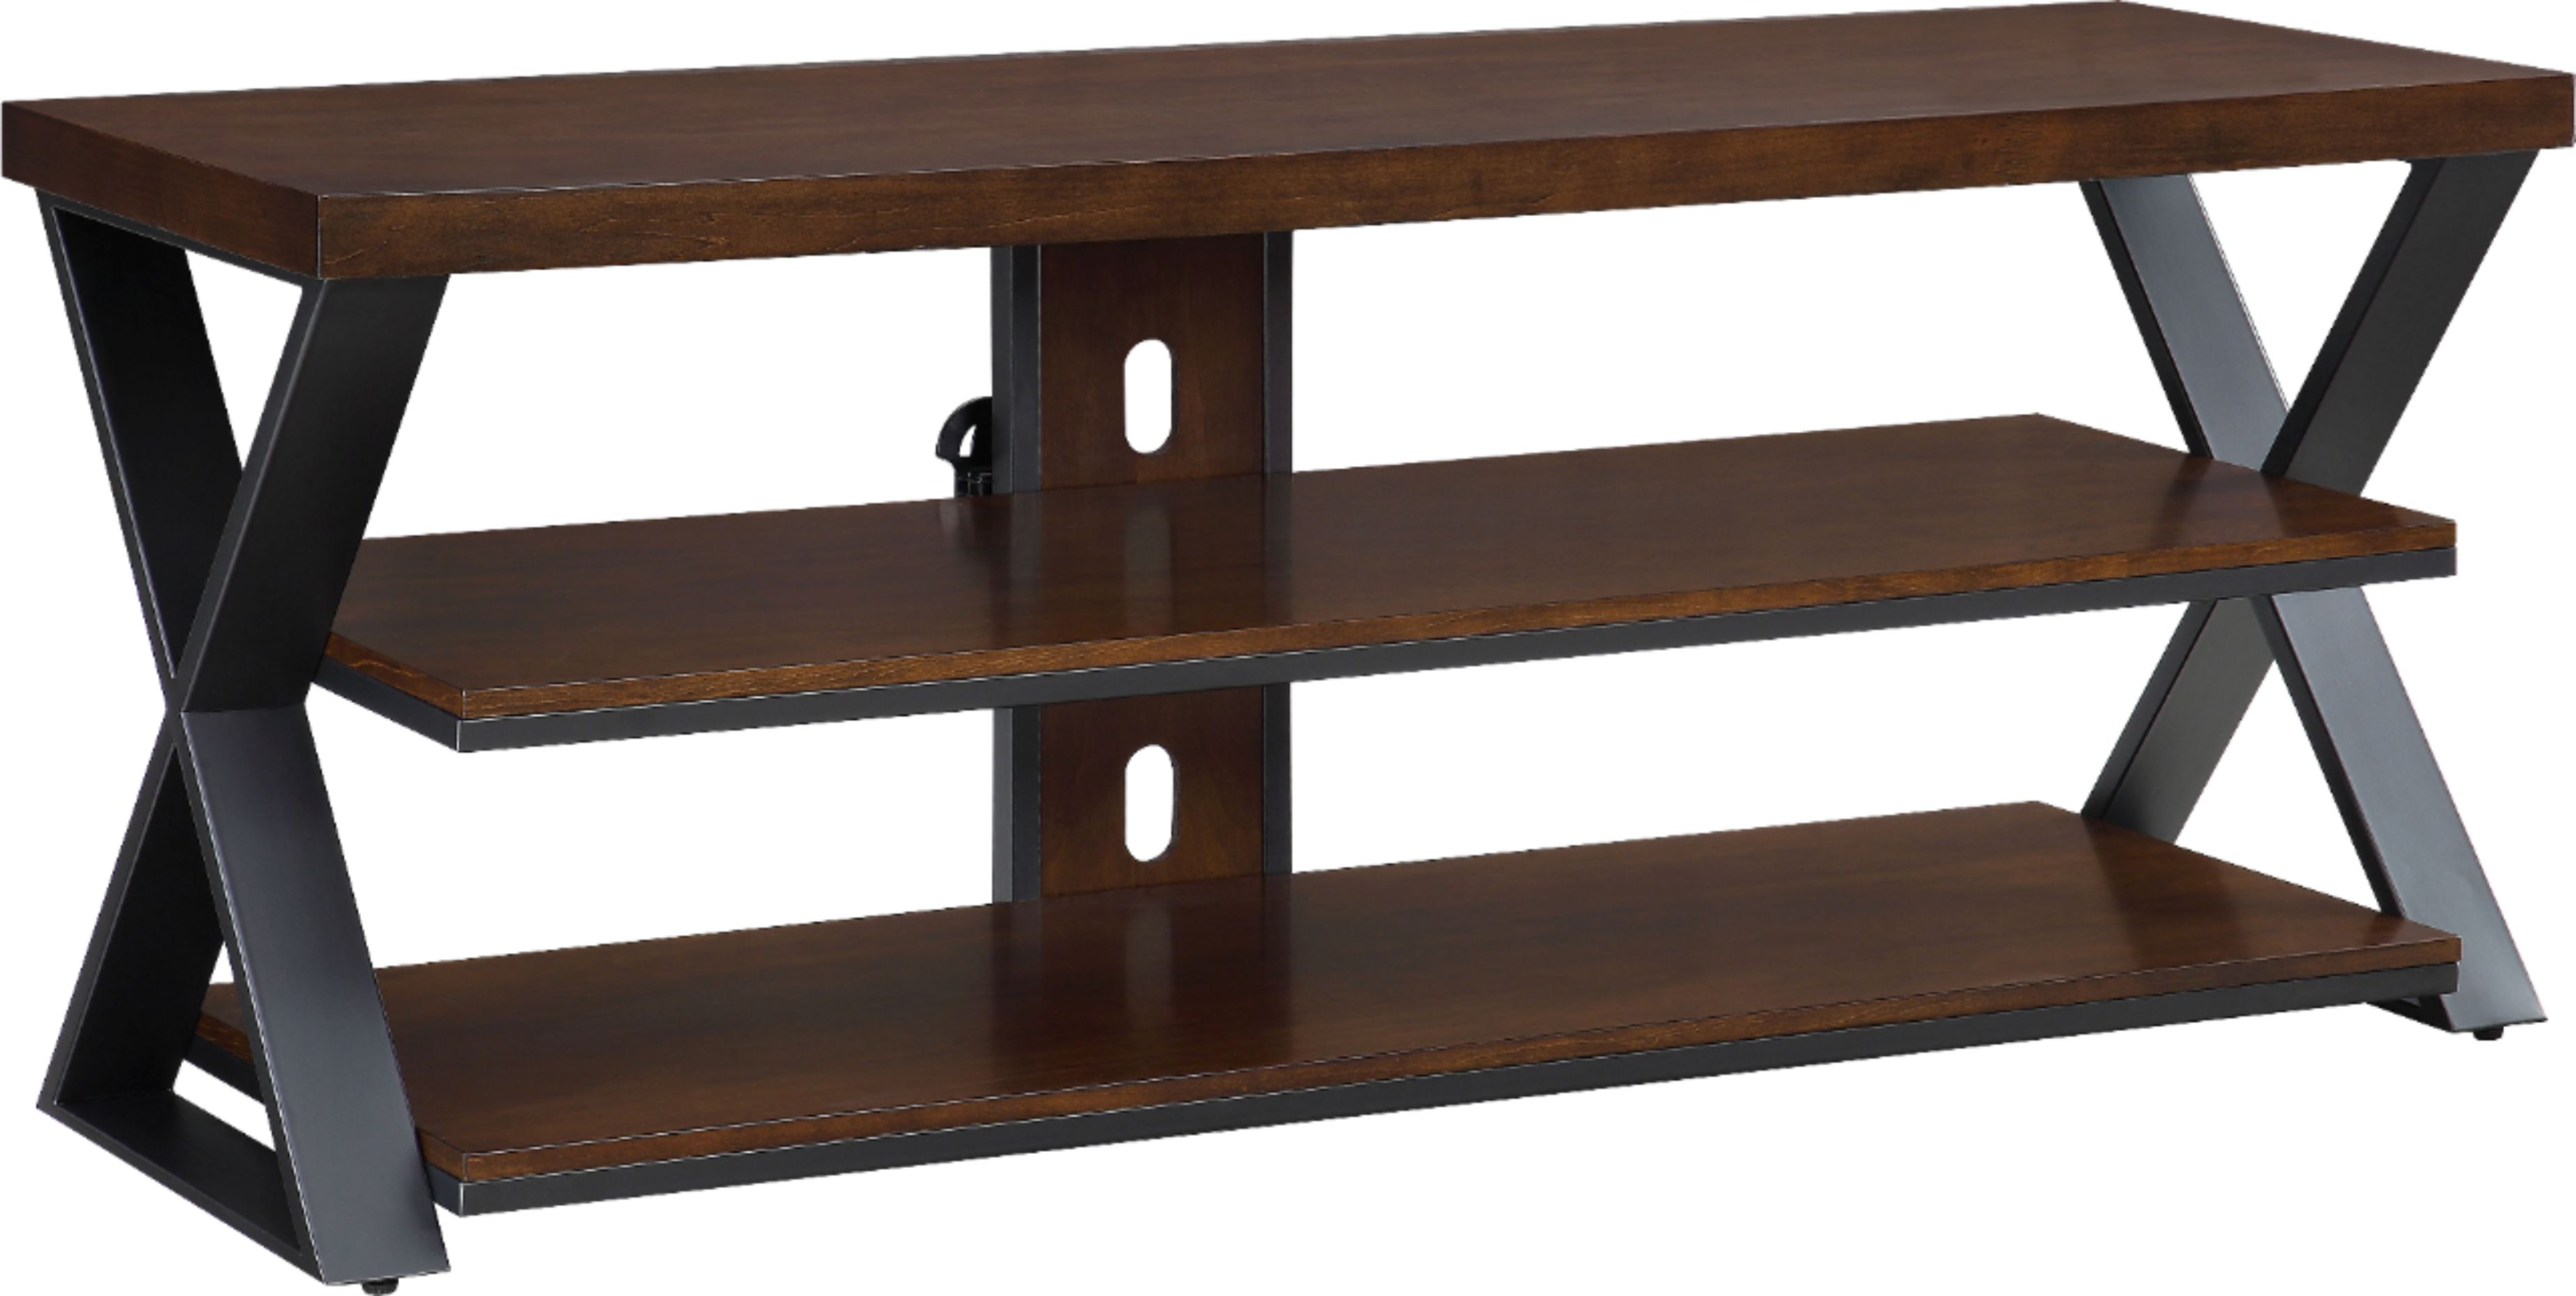 Left View: Whalen Furniture - TV Stand for Most TVs Up to 60" - Cherry brown